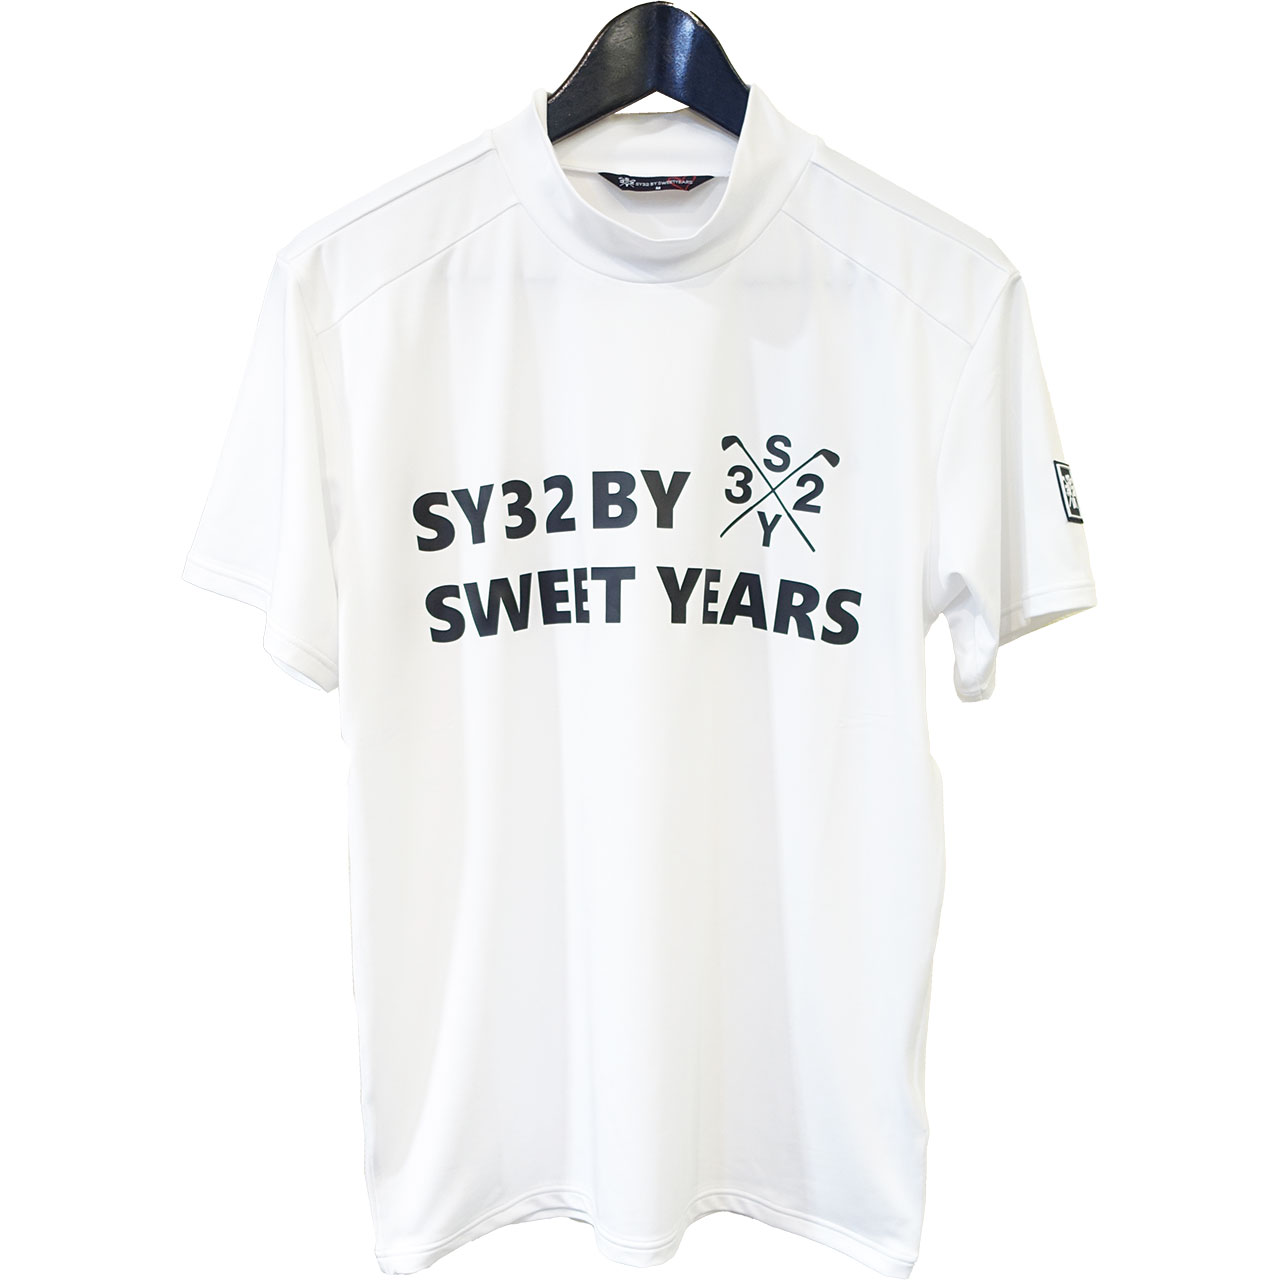 SY32 BY SWEET YEARS エスワイサーティン